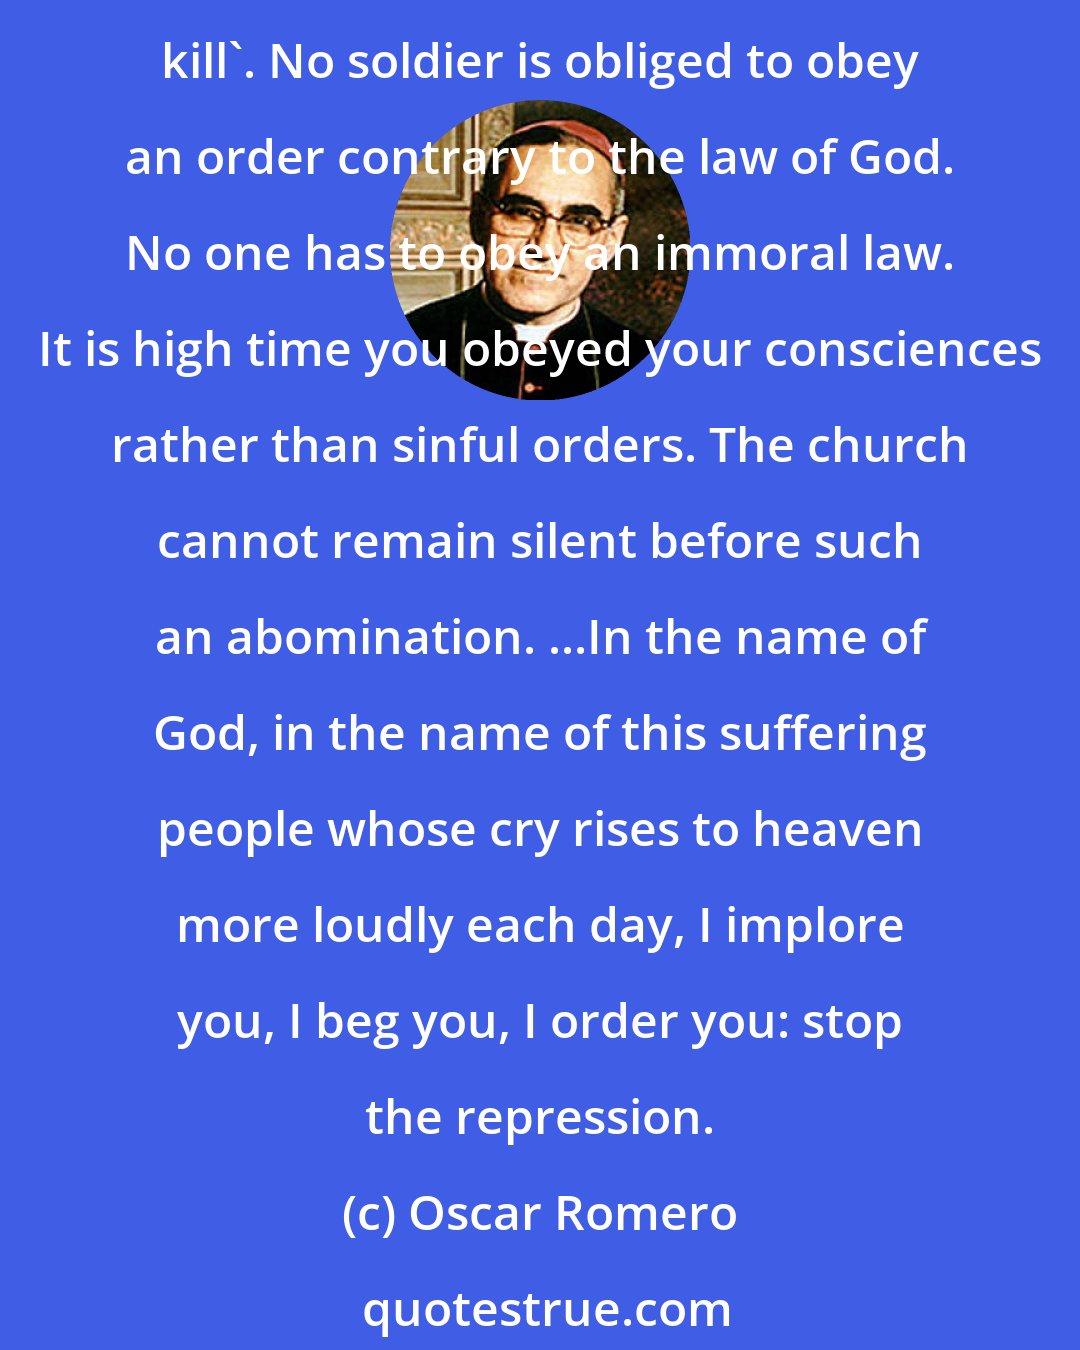 Oscar Romero: Brothers, you came from our own people. You are killing your own brothers. Any human order to kill must be subordinate to the law of God, which says, 'Thou shalt not kill'. No soldier is obliged to obey an order contrary to the law of God. No one has to obey an immoral law. It is high time you obeyed your consciences rather than sinful orders. The church cannot remain silent before such an abomination. ...In the name of God, in the name of this suffering people whose cry rises to heaven more loudly each day, I implore you, I beg you, I order you: stop the repression.